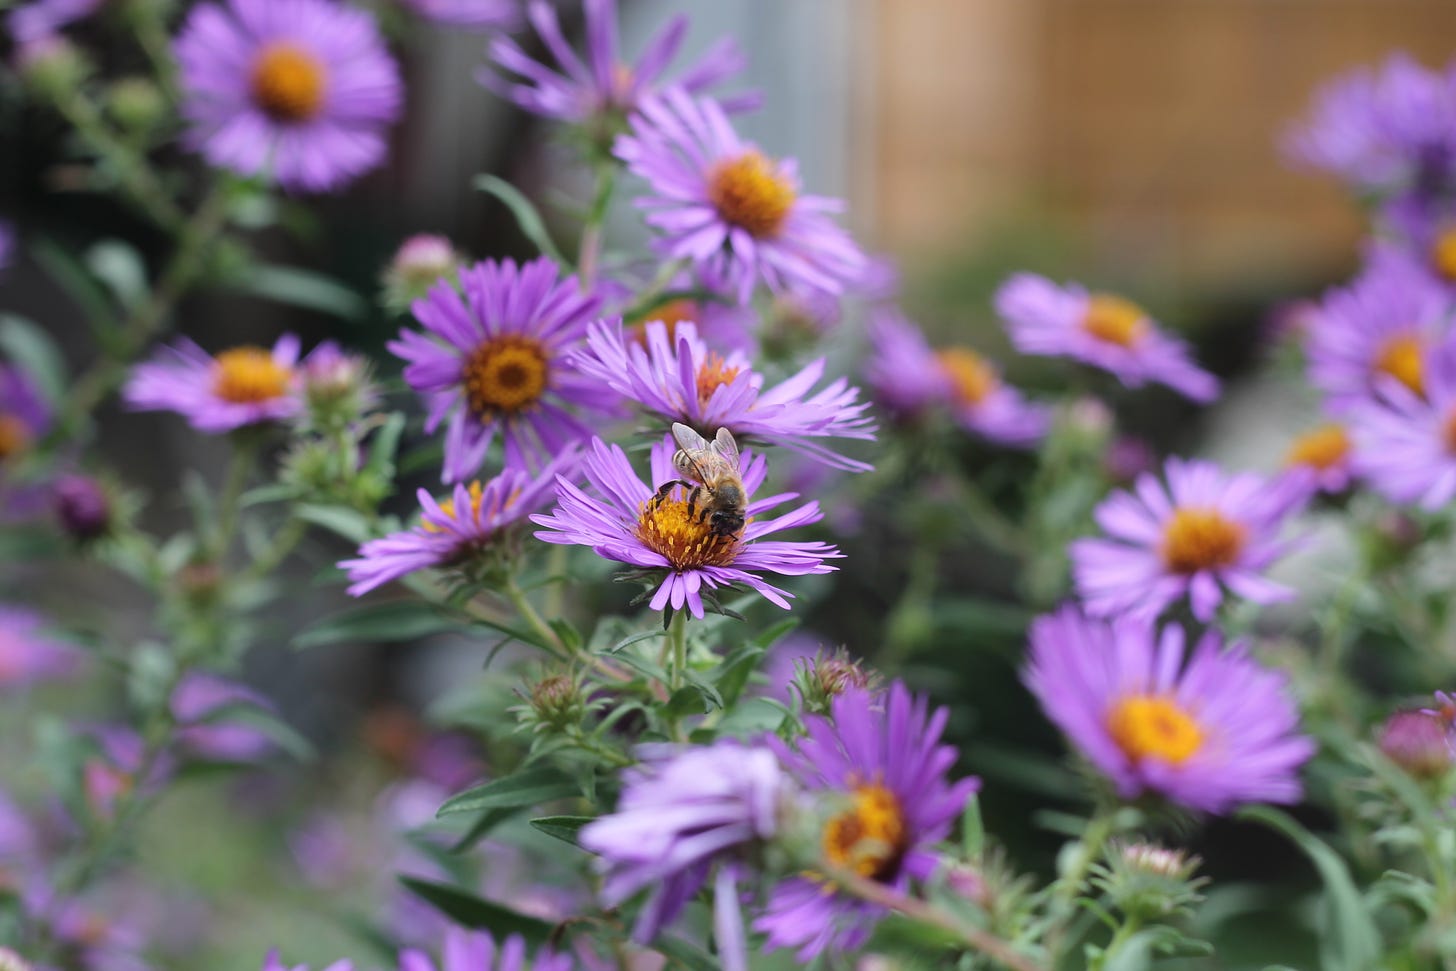 A honey bee perches on a purple flower with a yellow centre amidst a masses of similar flowers